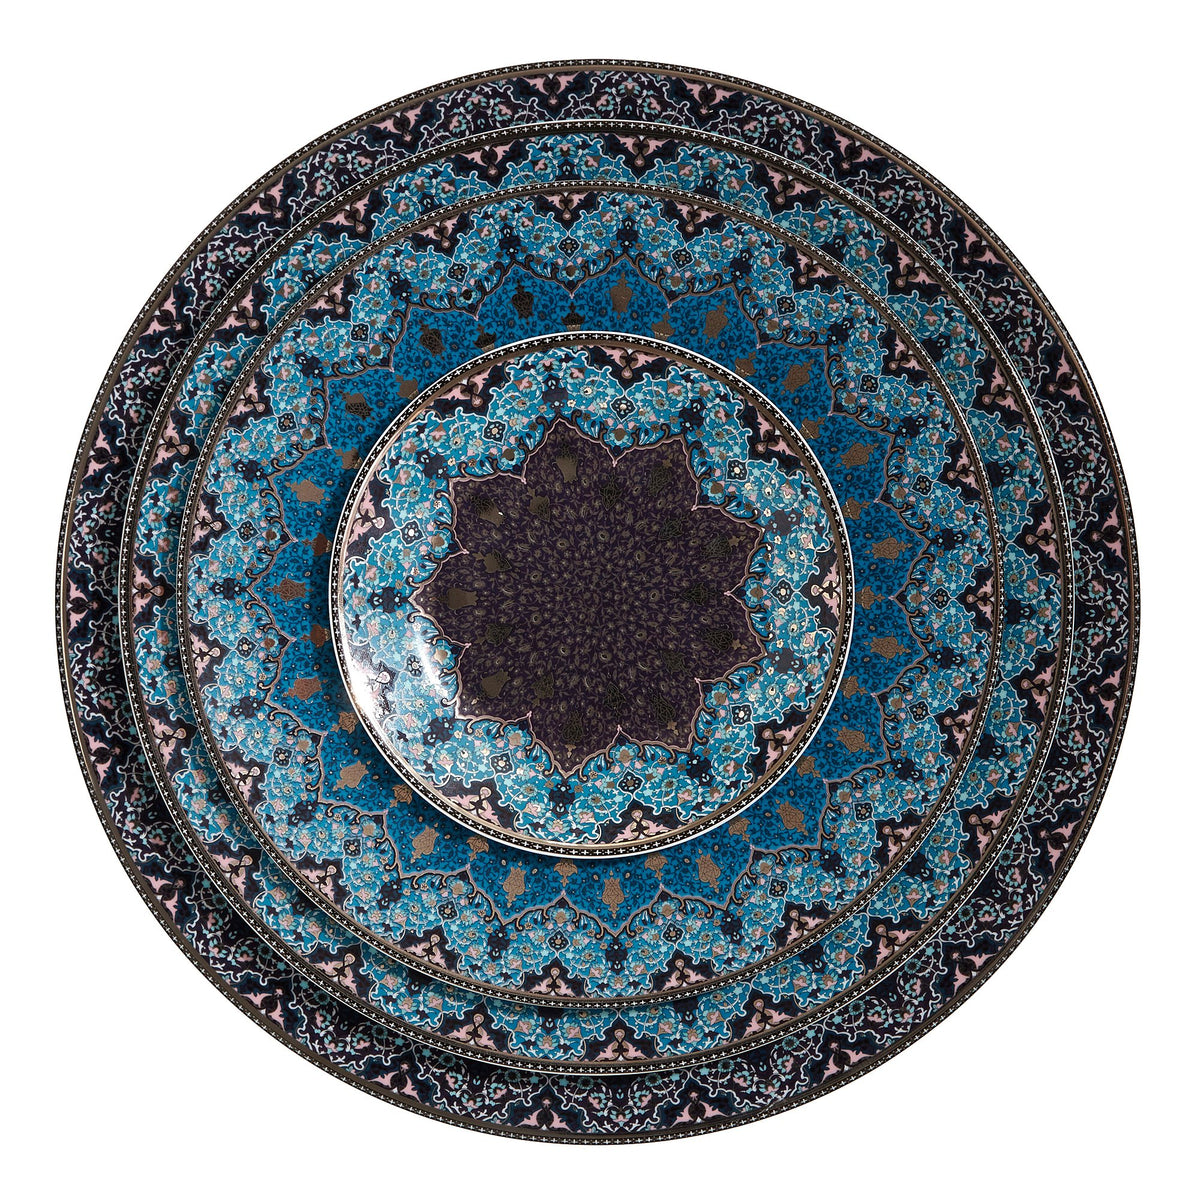 Dhara Peacock Bread and Butter Plate